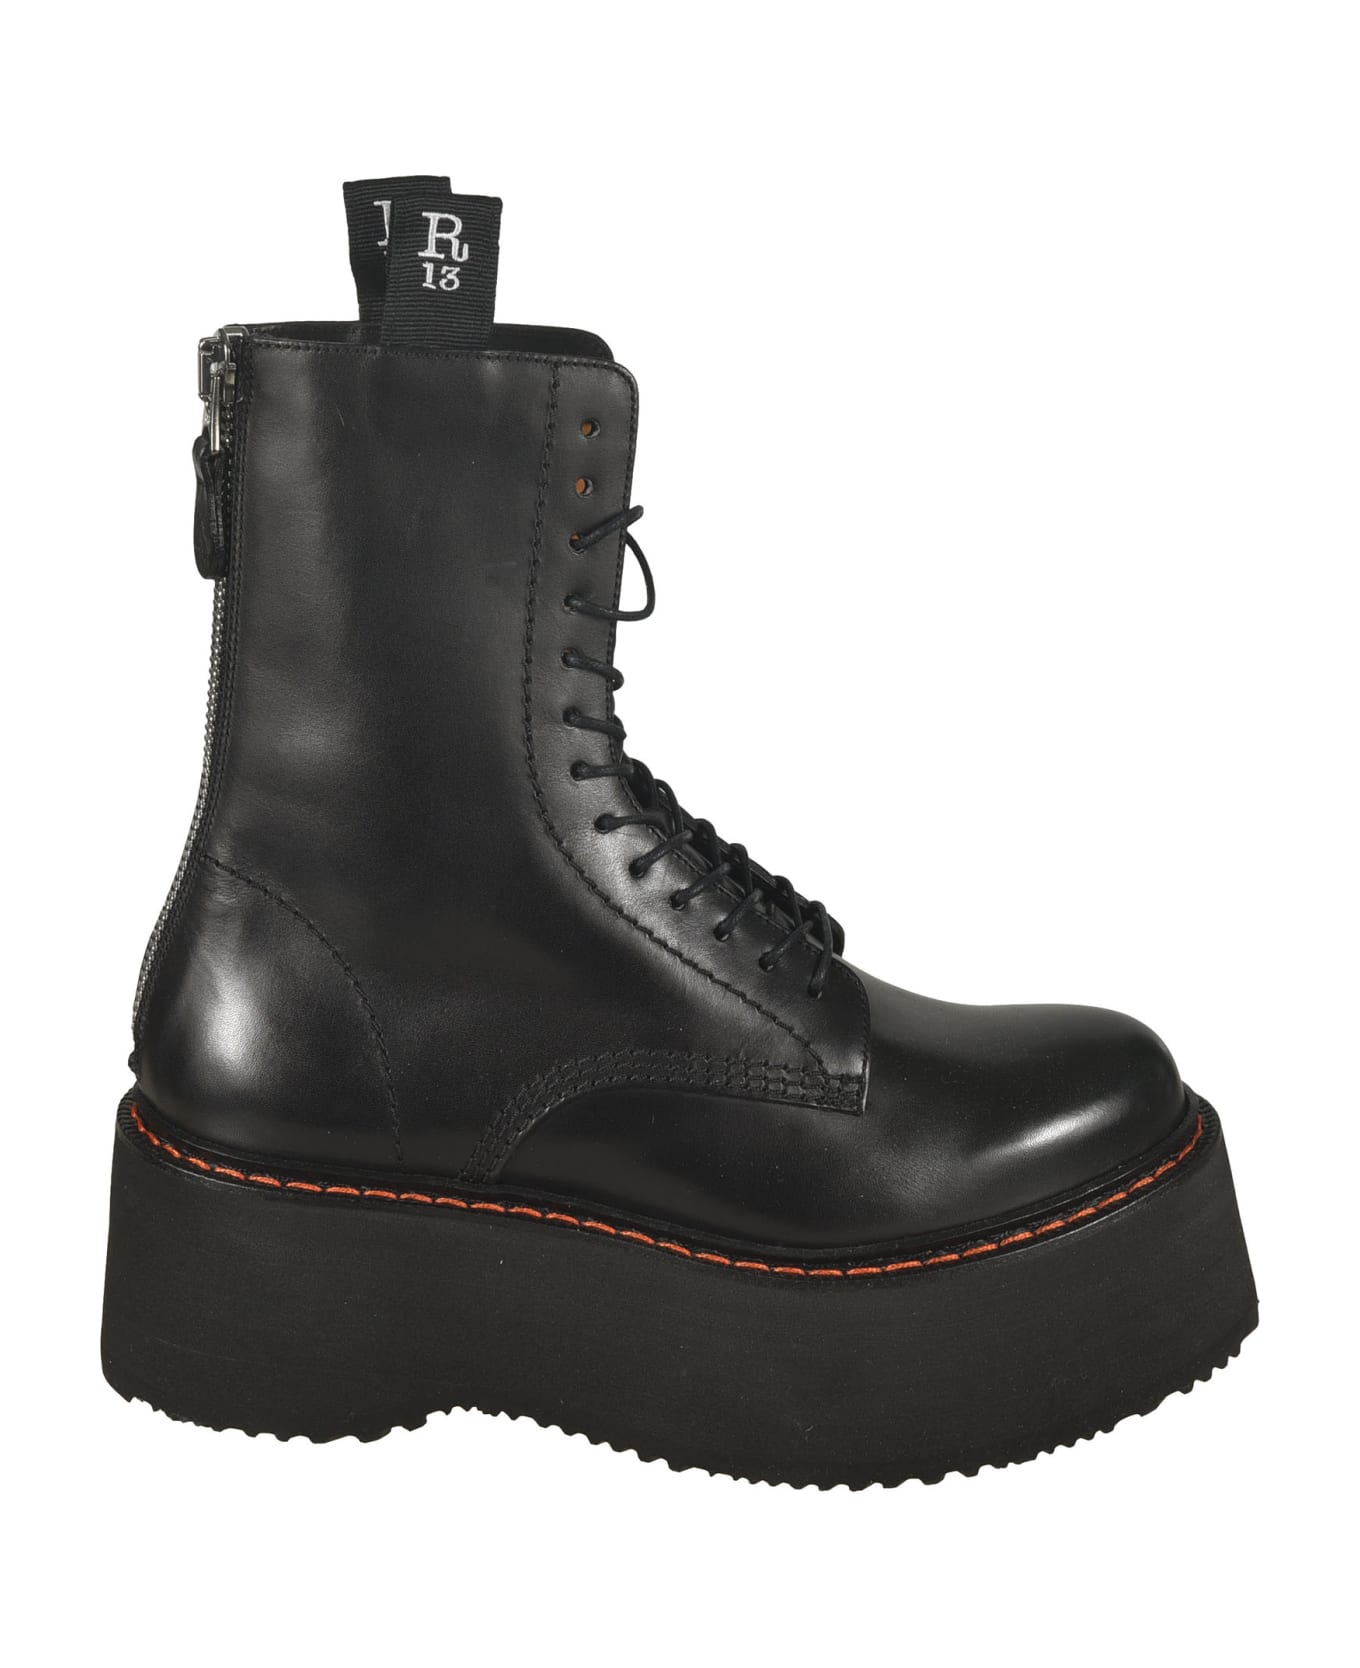 R13 X-stack Boots - Black